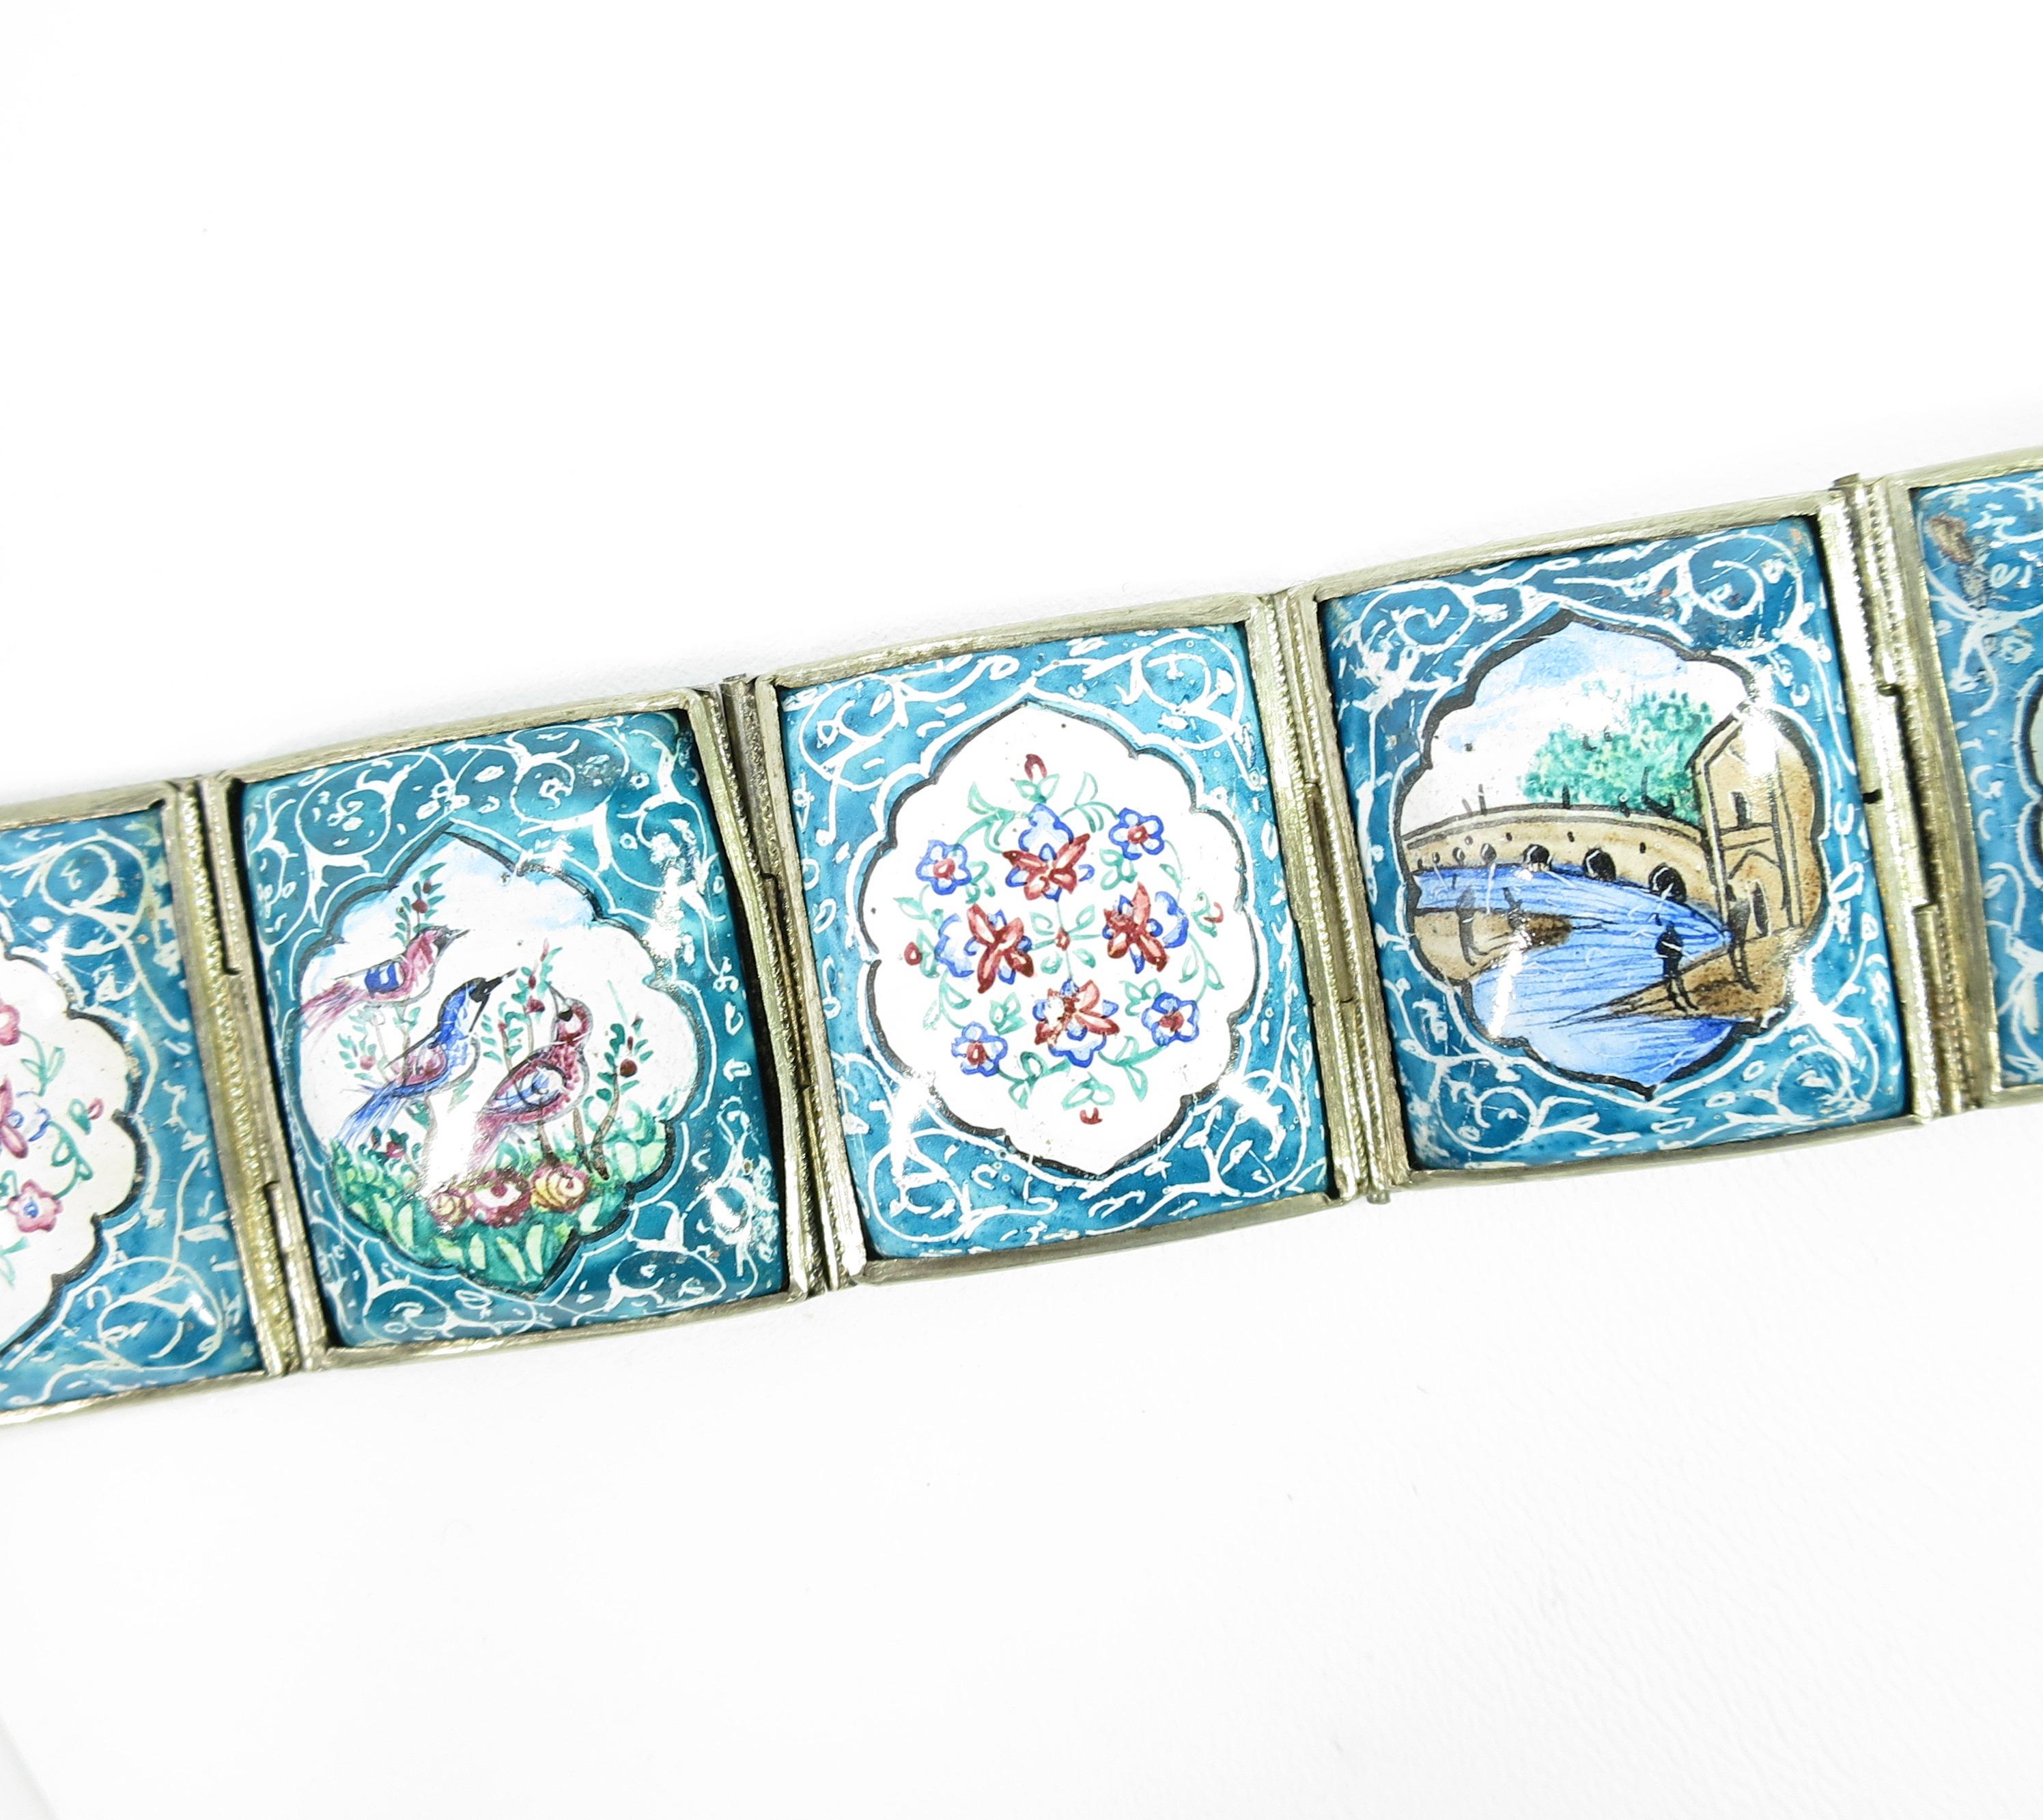 Persian Isfahan Silver Enamel Articulated Panel Bracelet, Artist-Signed 1930s In Good Condition For Sale In Burbank, CA